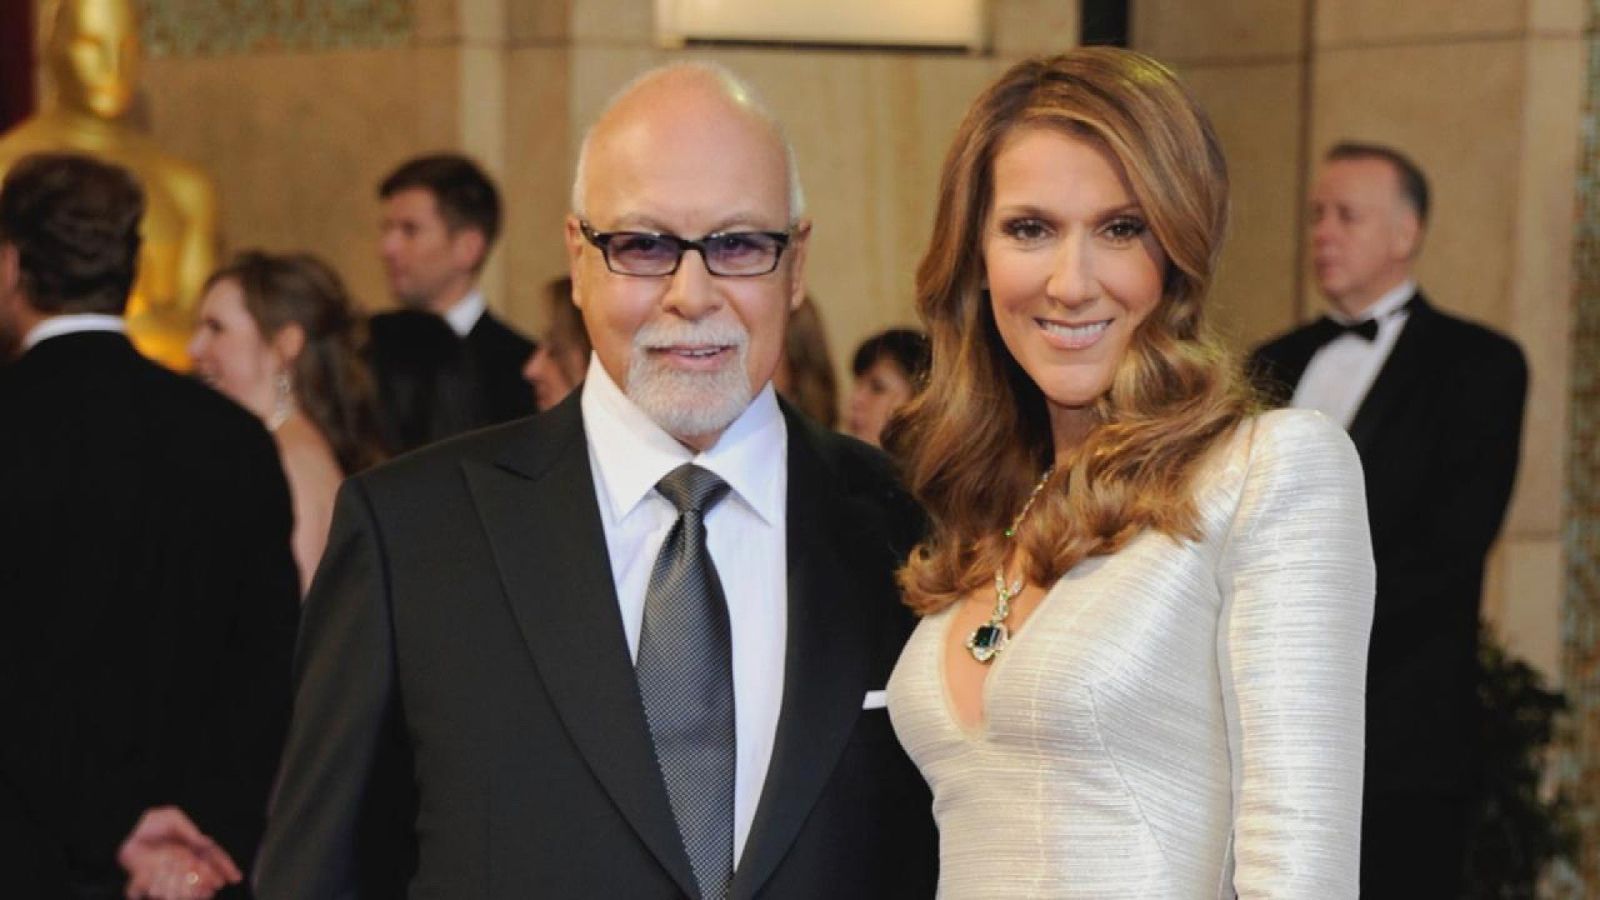 Celine Dion Pays Tribute To Late Husband Rene Angelil With An Emotional Post